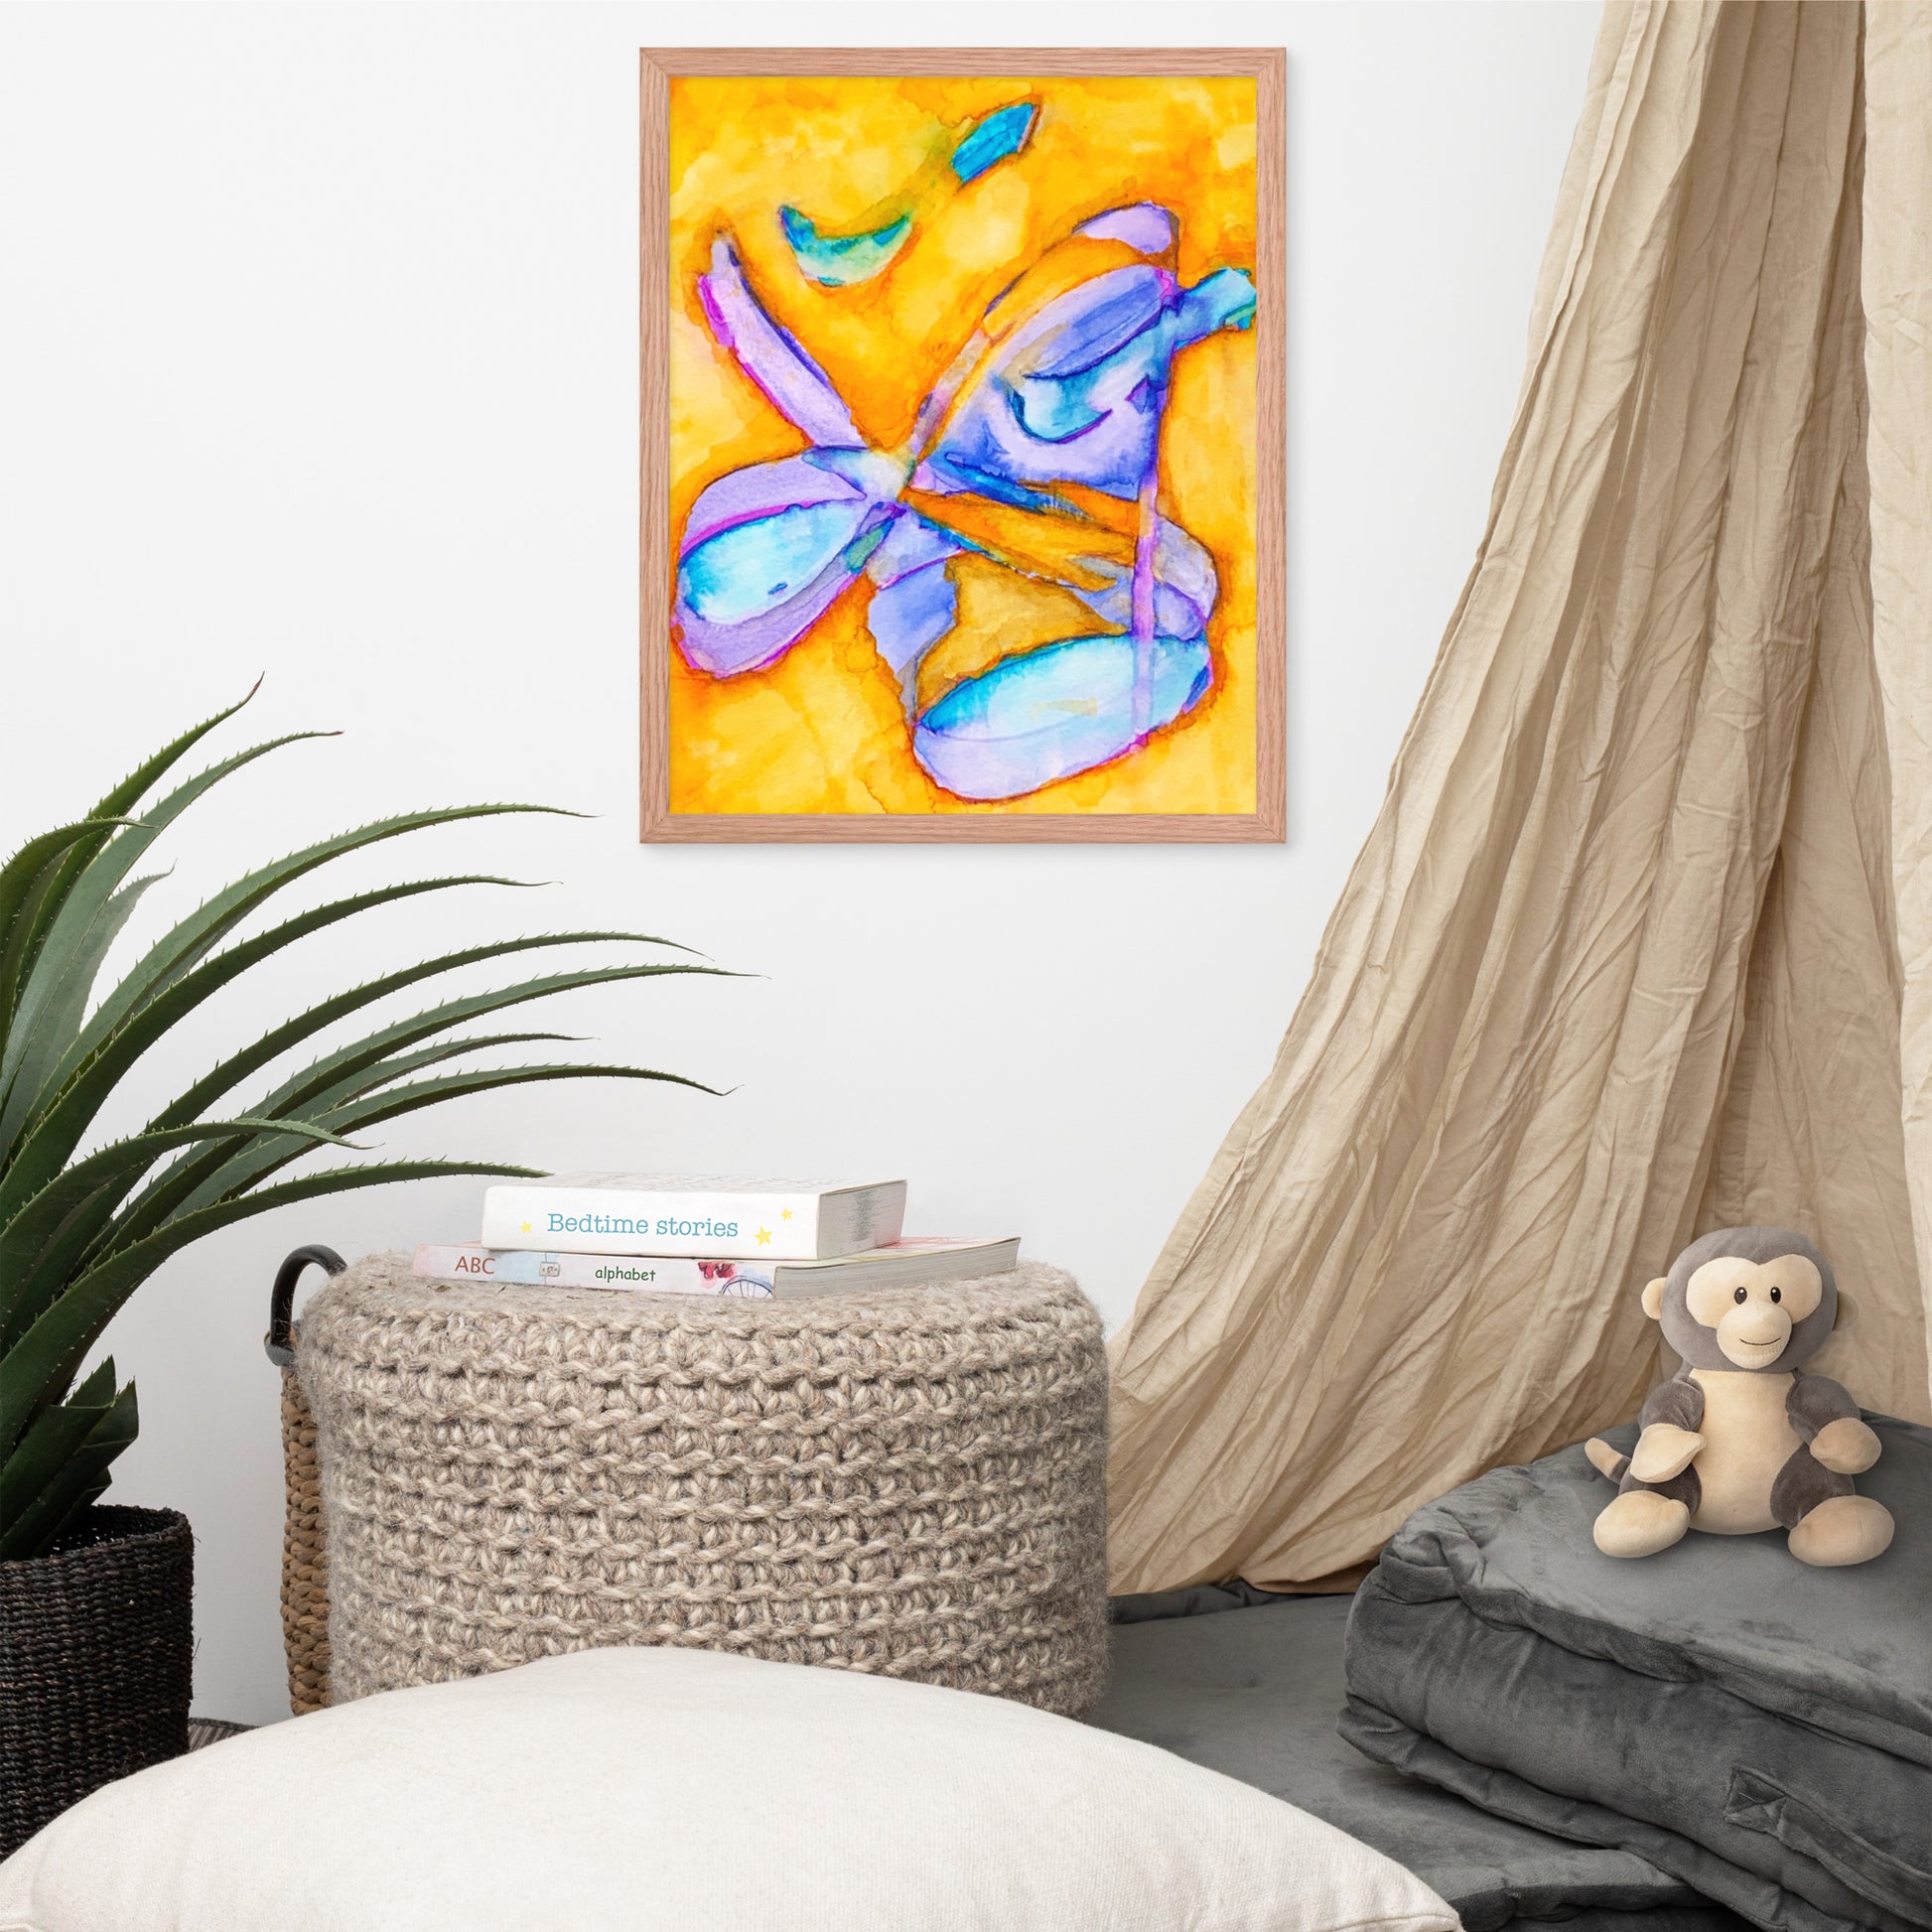 Dragonfly Abstract Poster Framed - Art Love Decor